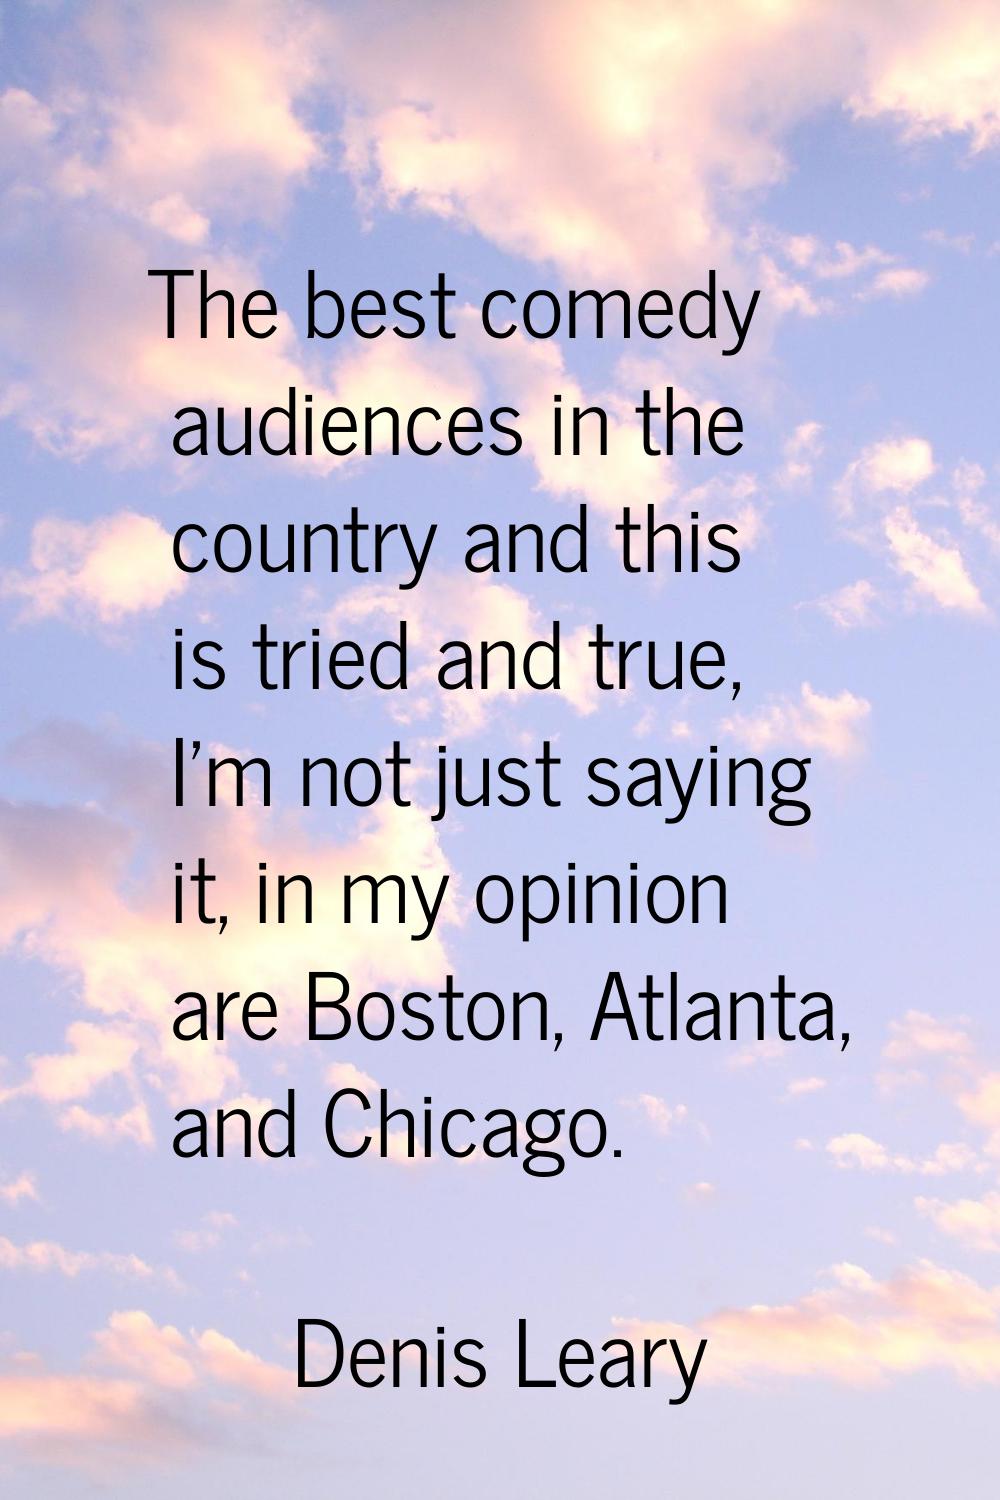 The best comedy audiences in the country and this is tried and true, I'm not just saying it, in my 